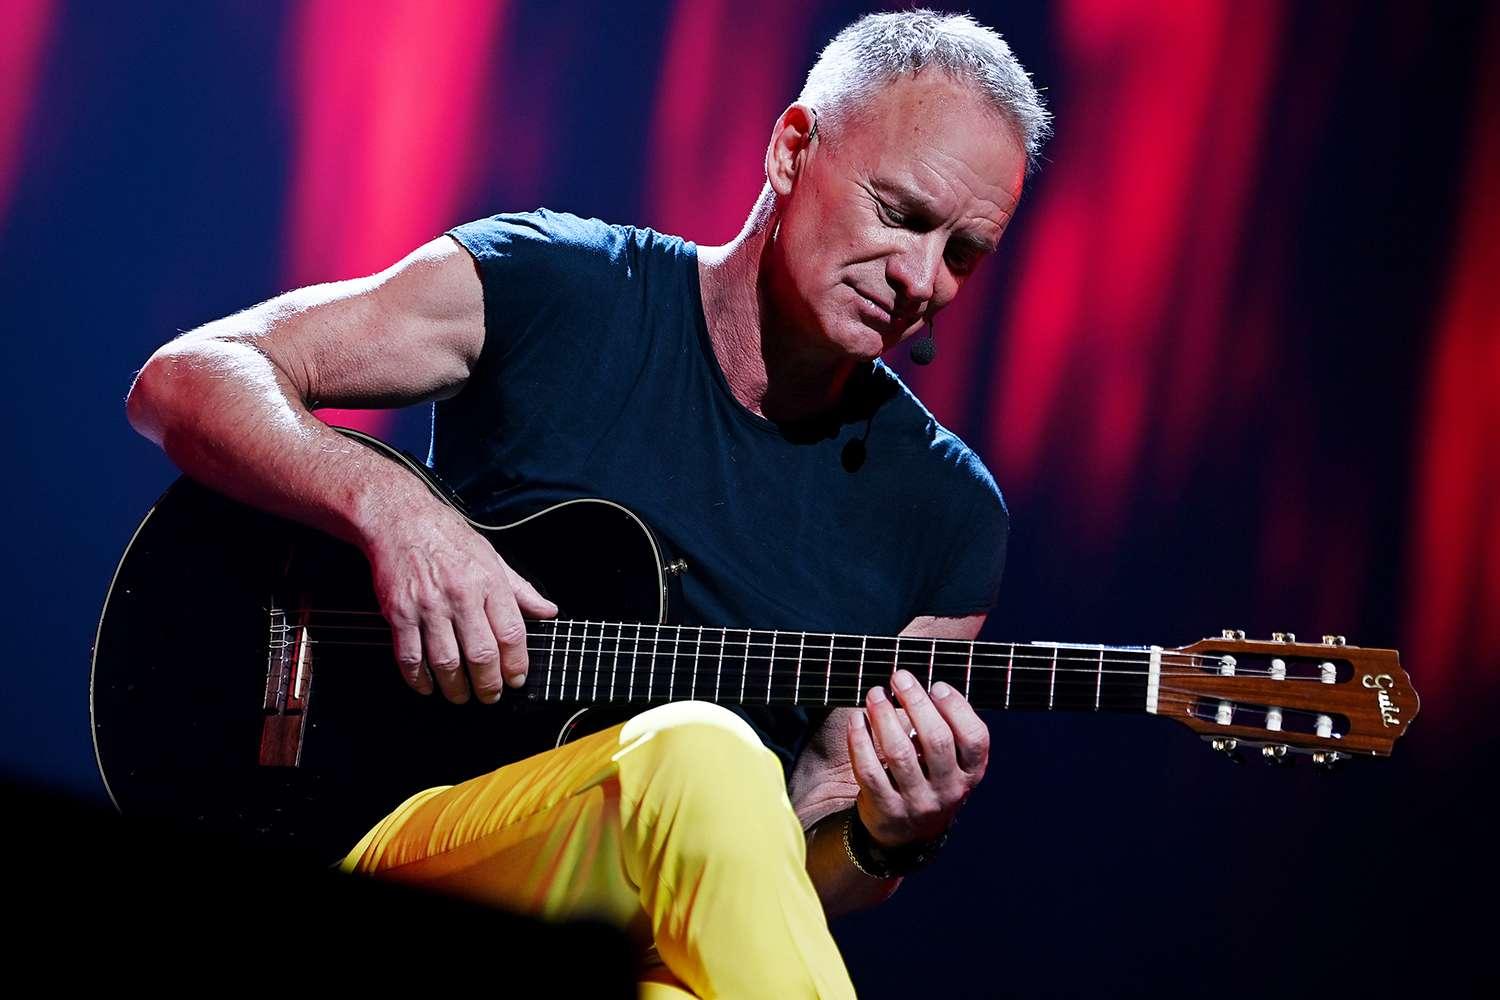 Sting to headline spectacular new year's eve bash at Atlantis The Palm